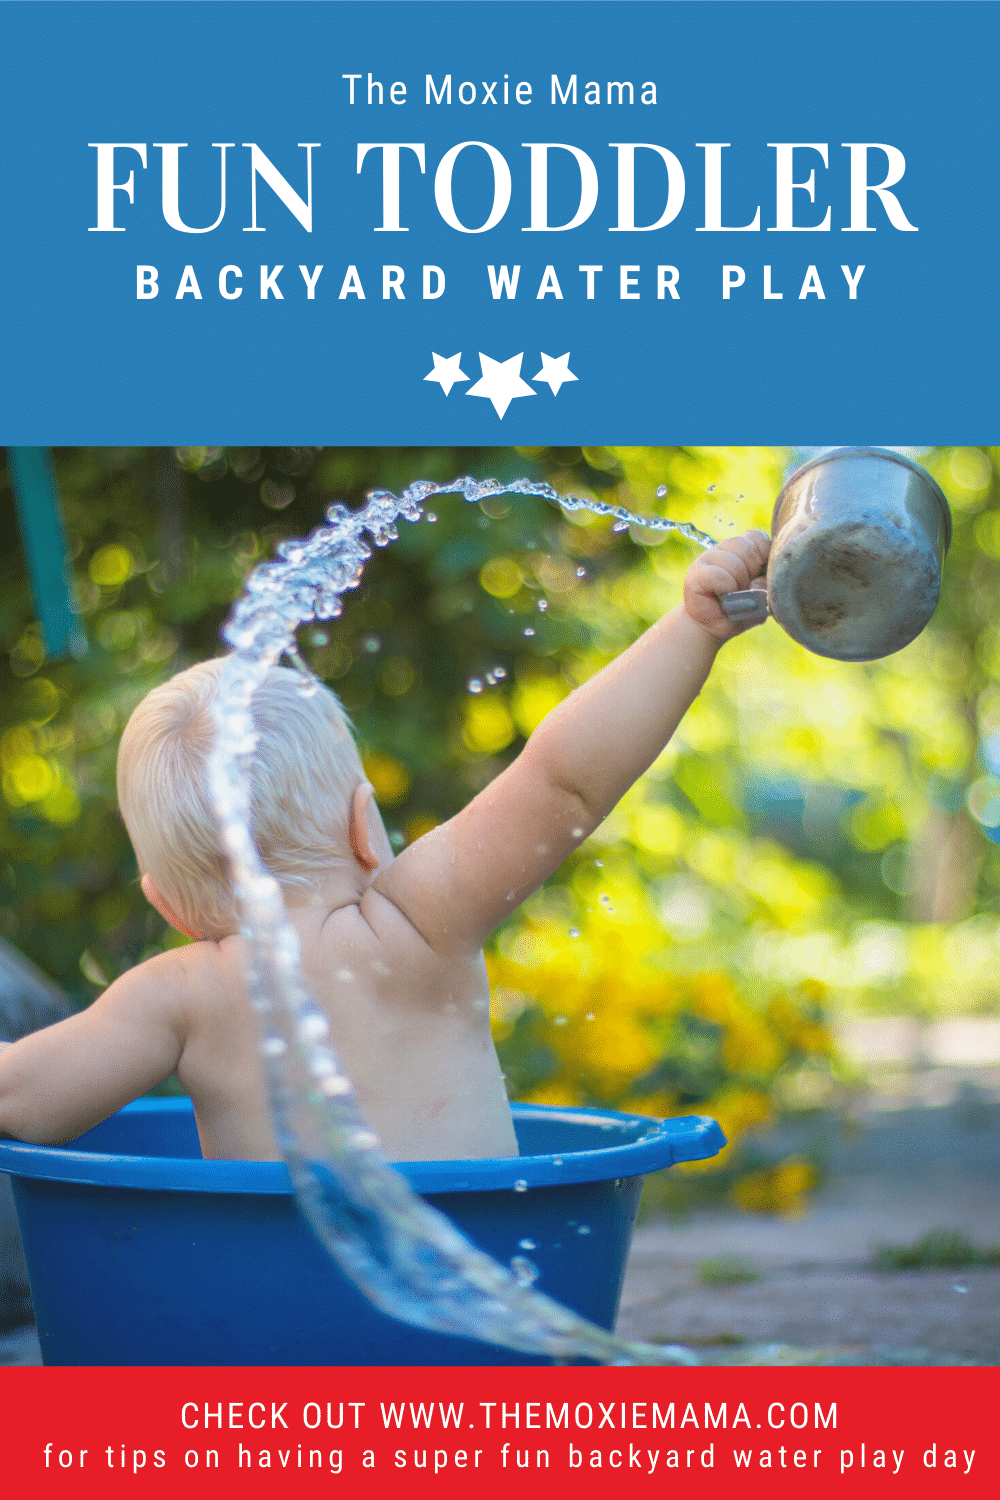 Toddlers and kids alike love the water. Whether they are stirring water, splashing in it, pouring it, adding things to it, they just love it. Water is an enormously valuable tool in child development. Water play can help teach science and math, improve physical ability, and cultivate cognitive development.